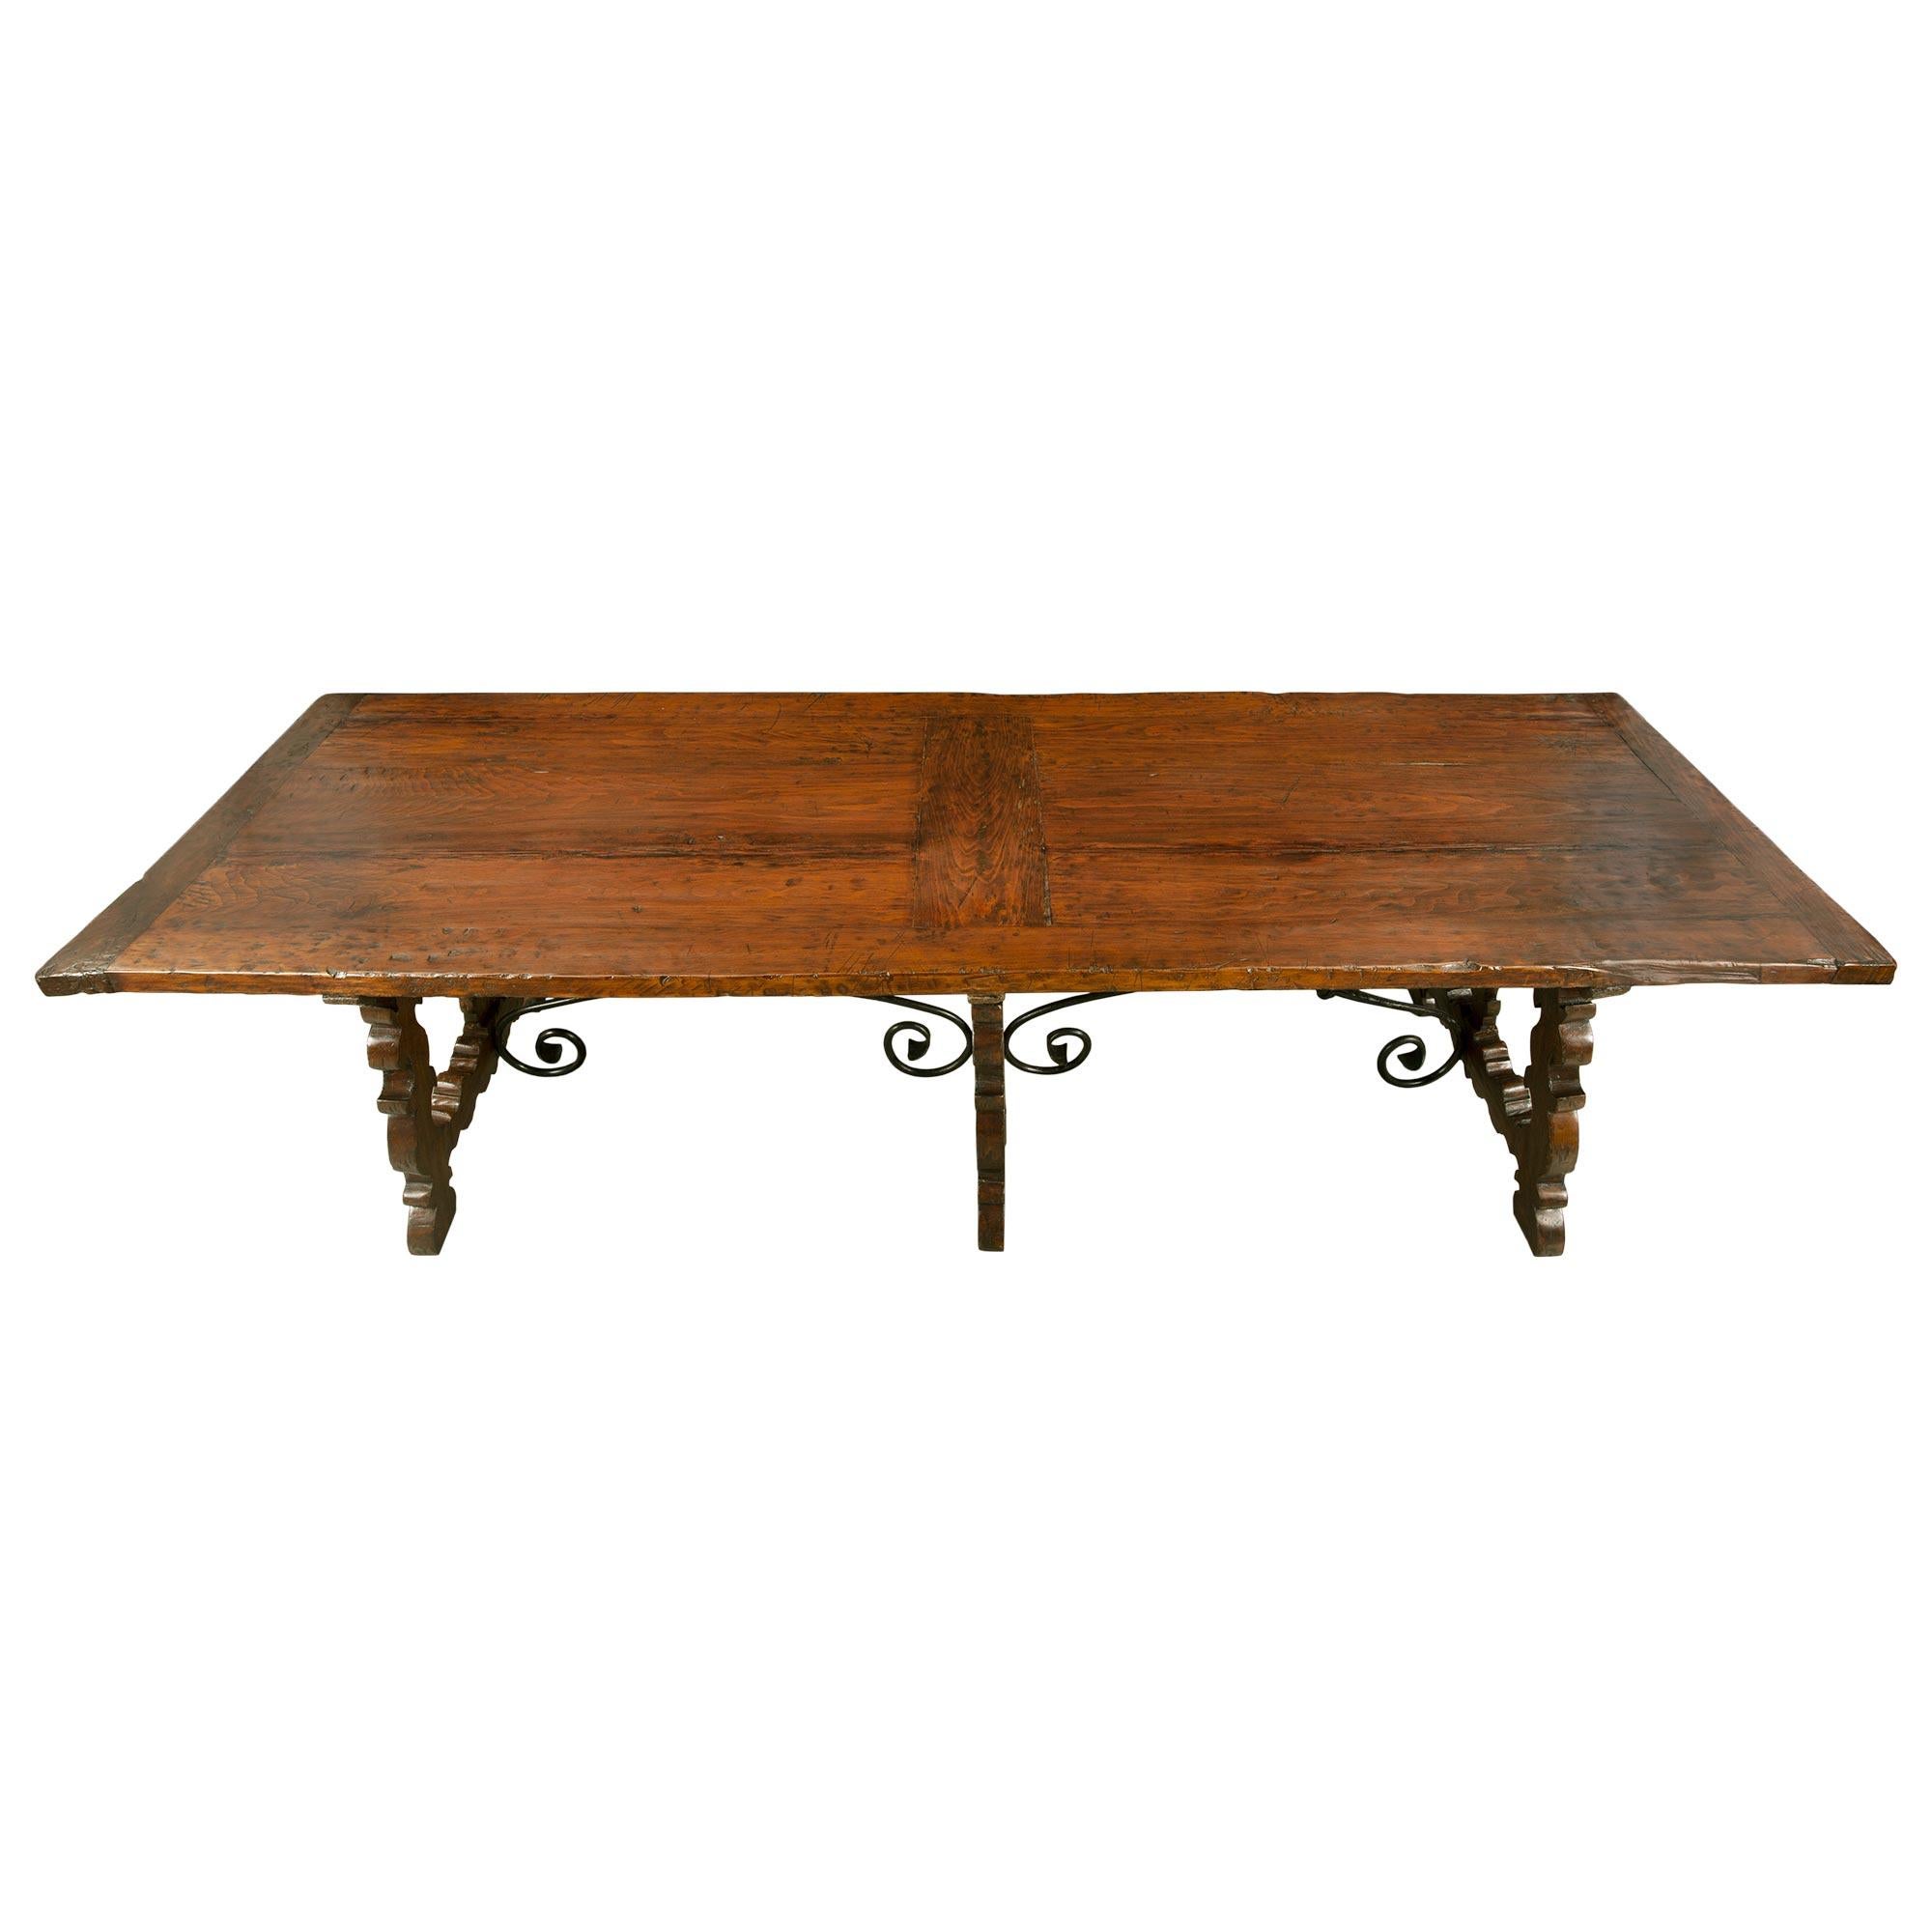 A unique and most decorative Italian 19th century walnut trestle table from Tuscany. The table is raised by three beautiful supports with fine carved scrolled foliate designs, X shaped iron mounts at each side and pegs. Each support is attached by